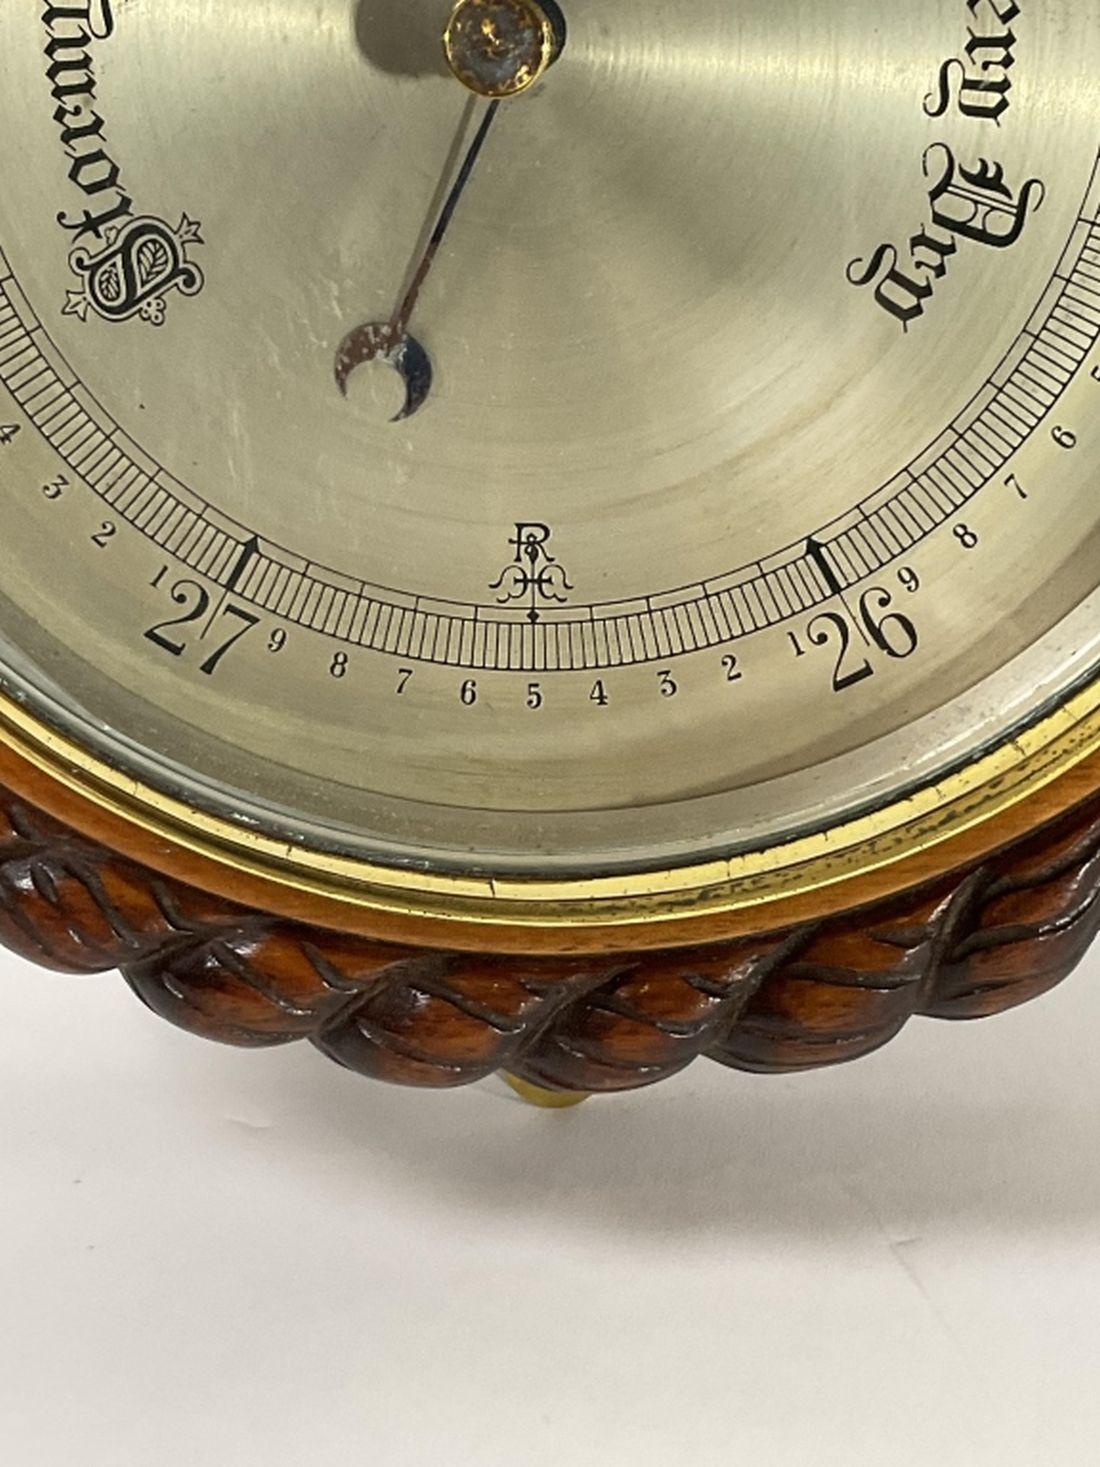 Nautical Barometer with Rope Carved Trim - Lannan Gallery